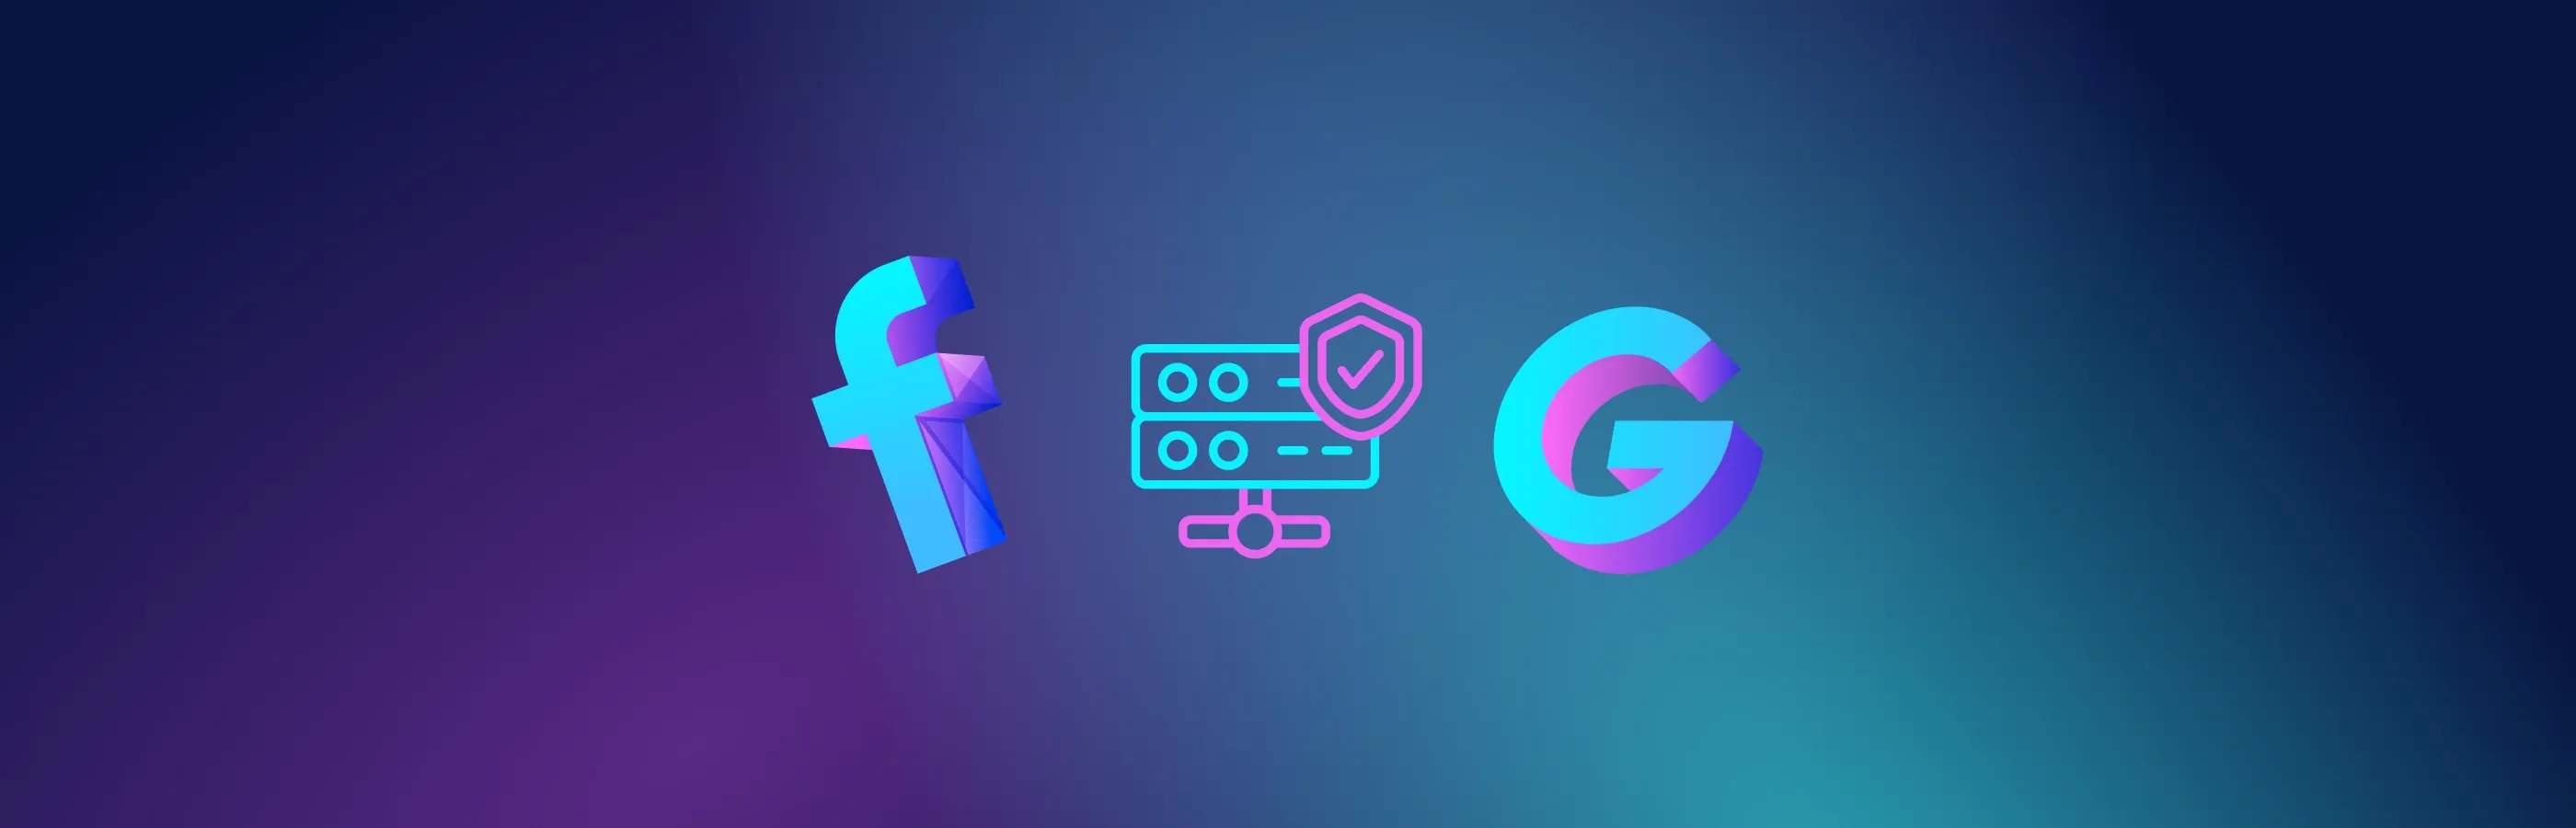 How to Choose Good Proxies for Facebook and Google: 6 Tips